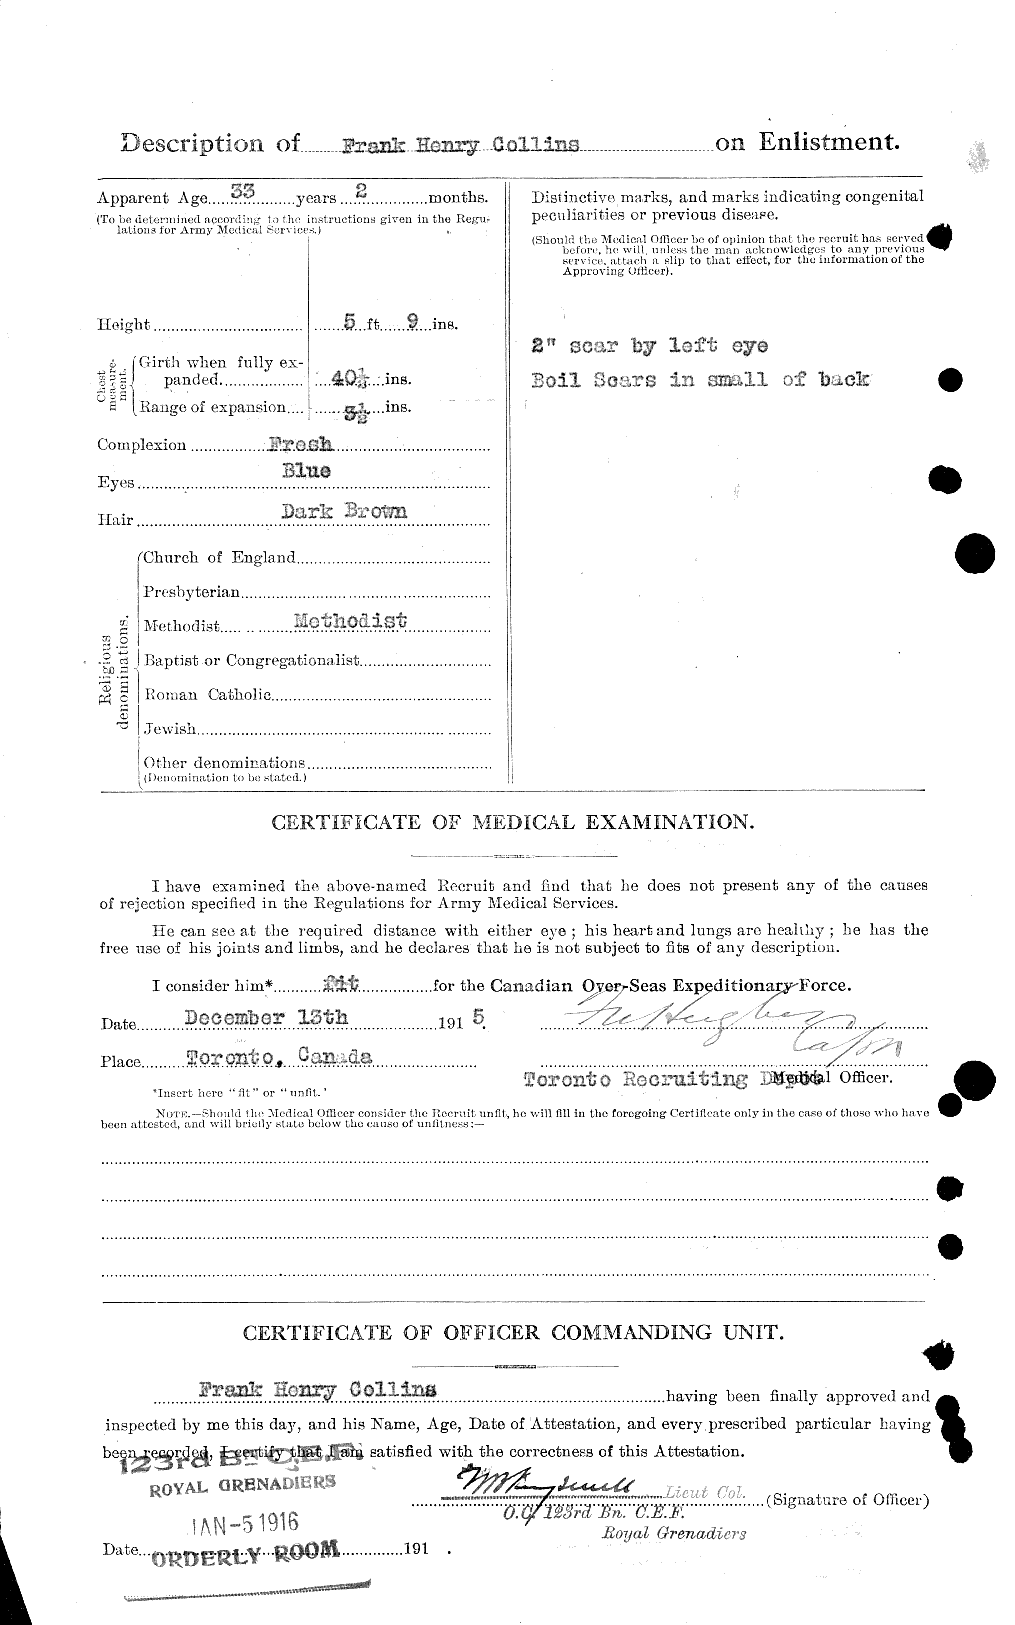 Personnel Records of the First World War - CEF 037812b